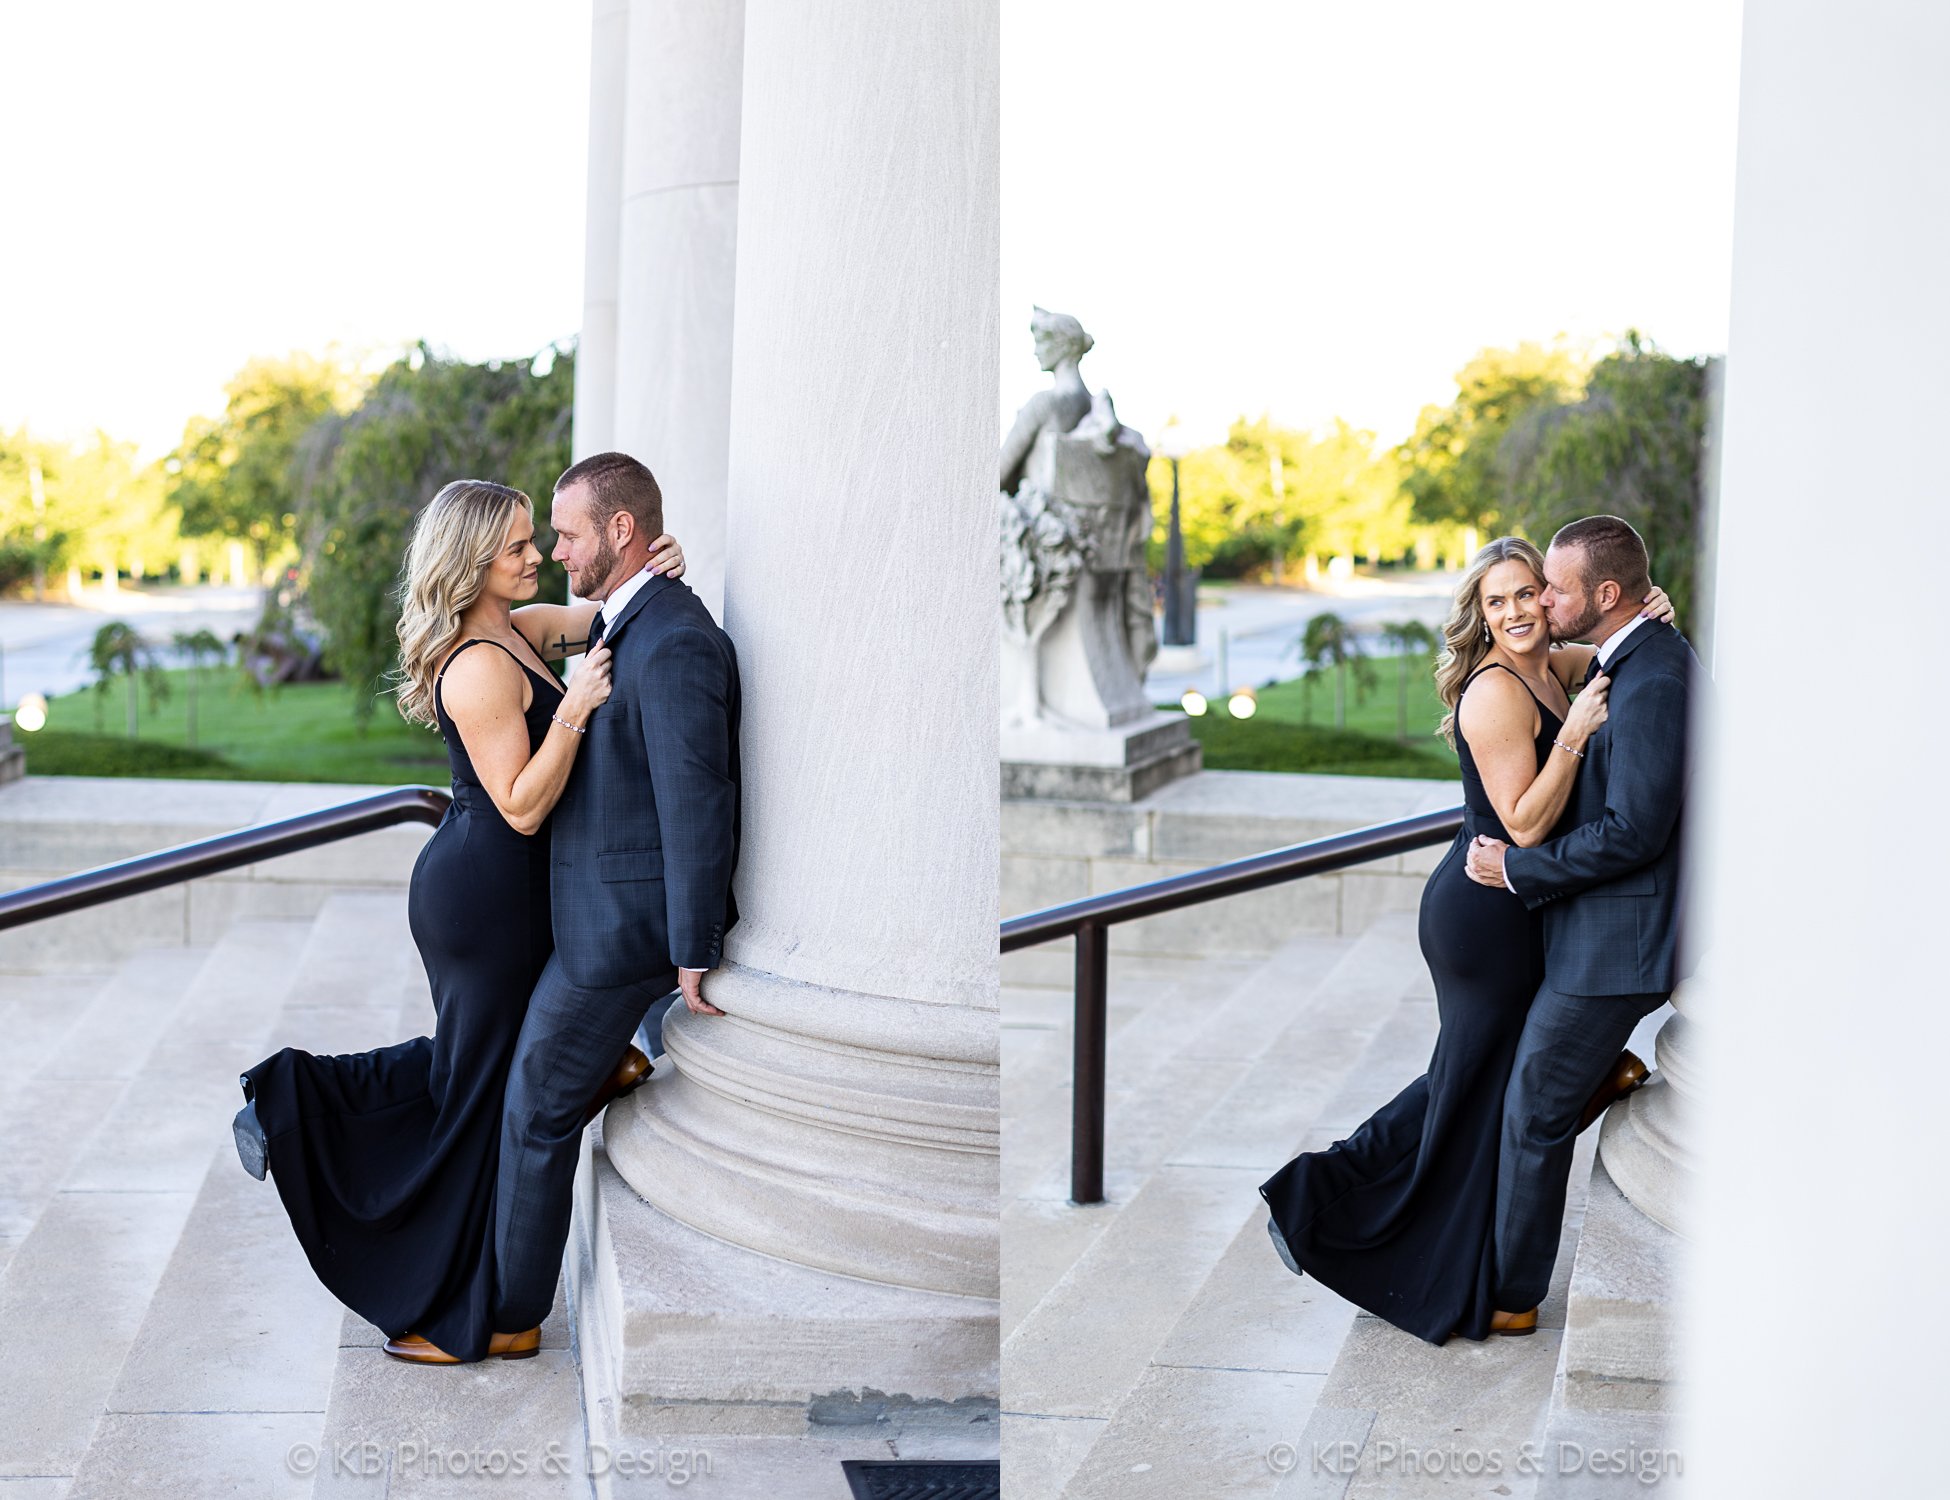 Taylor Drew engagement photography at St Louis Missouri STL Art Museum in Forest Park with best engagement wedding photographer KB Photos and Design of St. Louis Chesterfield Missouri